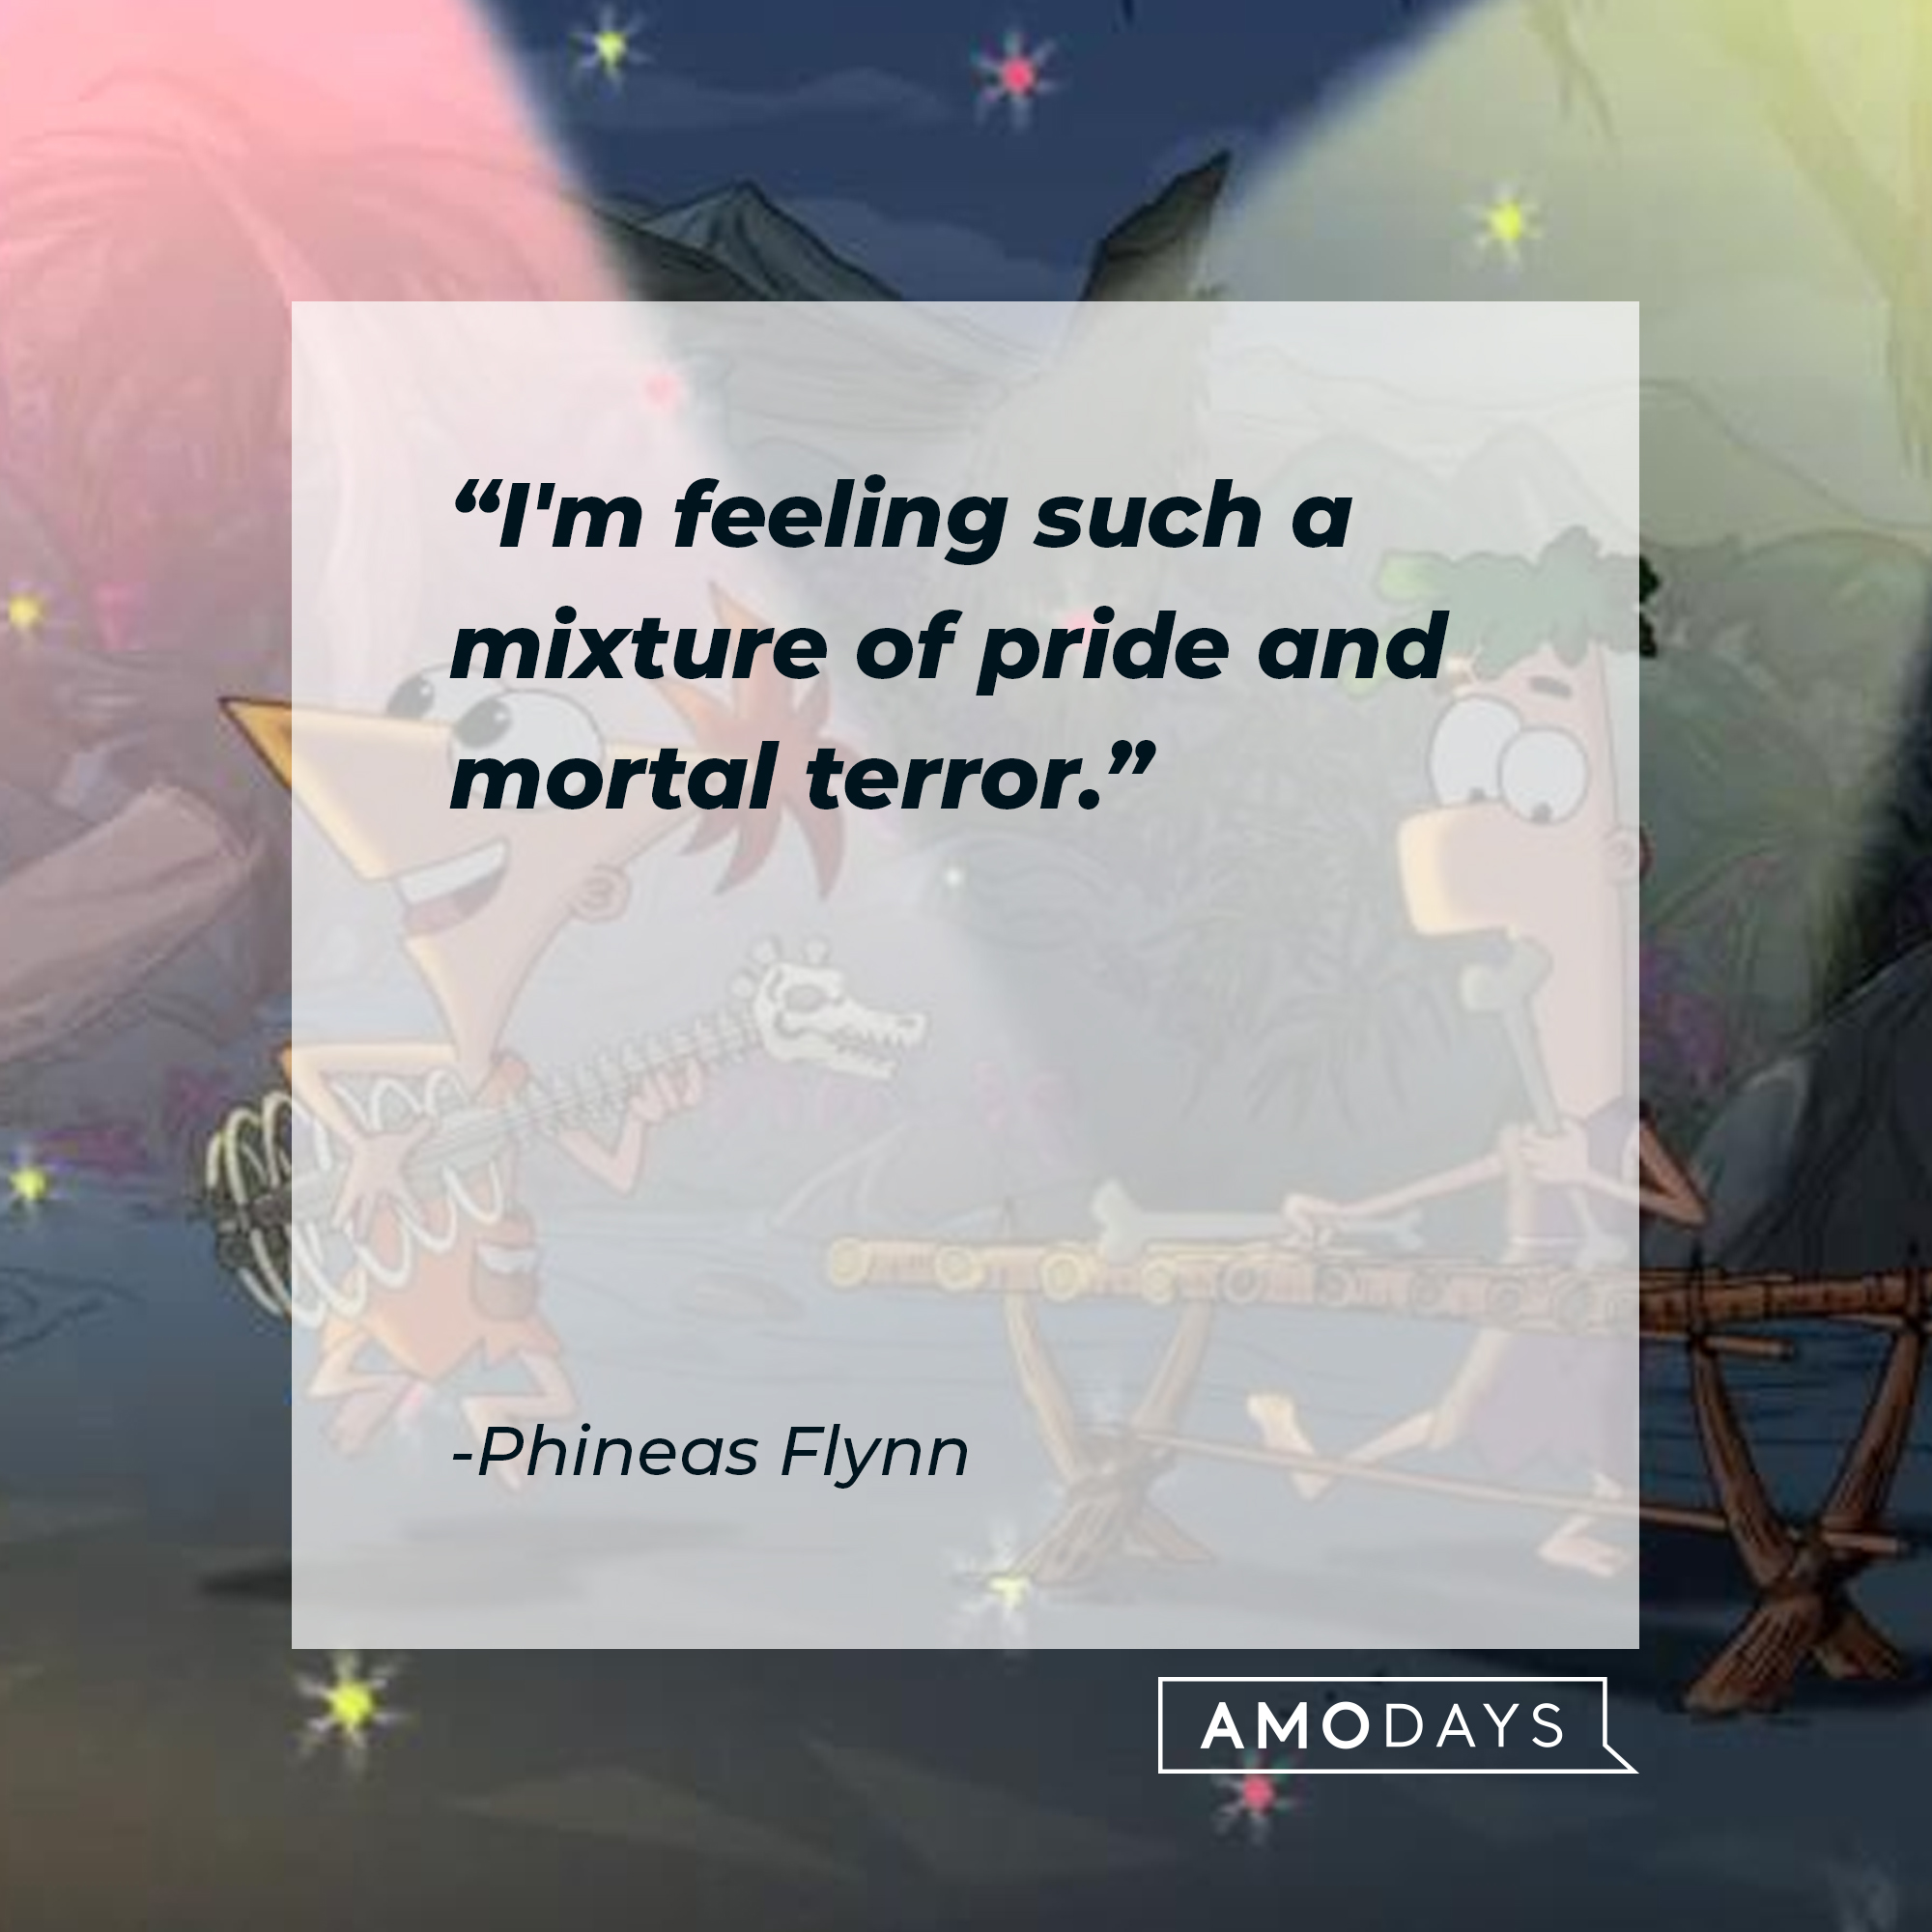 Phineas Flynn's quote: "I'm feeling such a mixture of pride and mortal terror." | Source: facebook.com/Phineas-and-Ferb